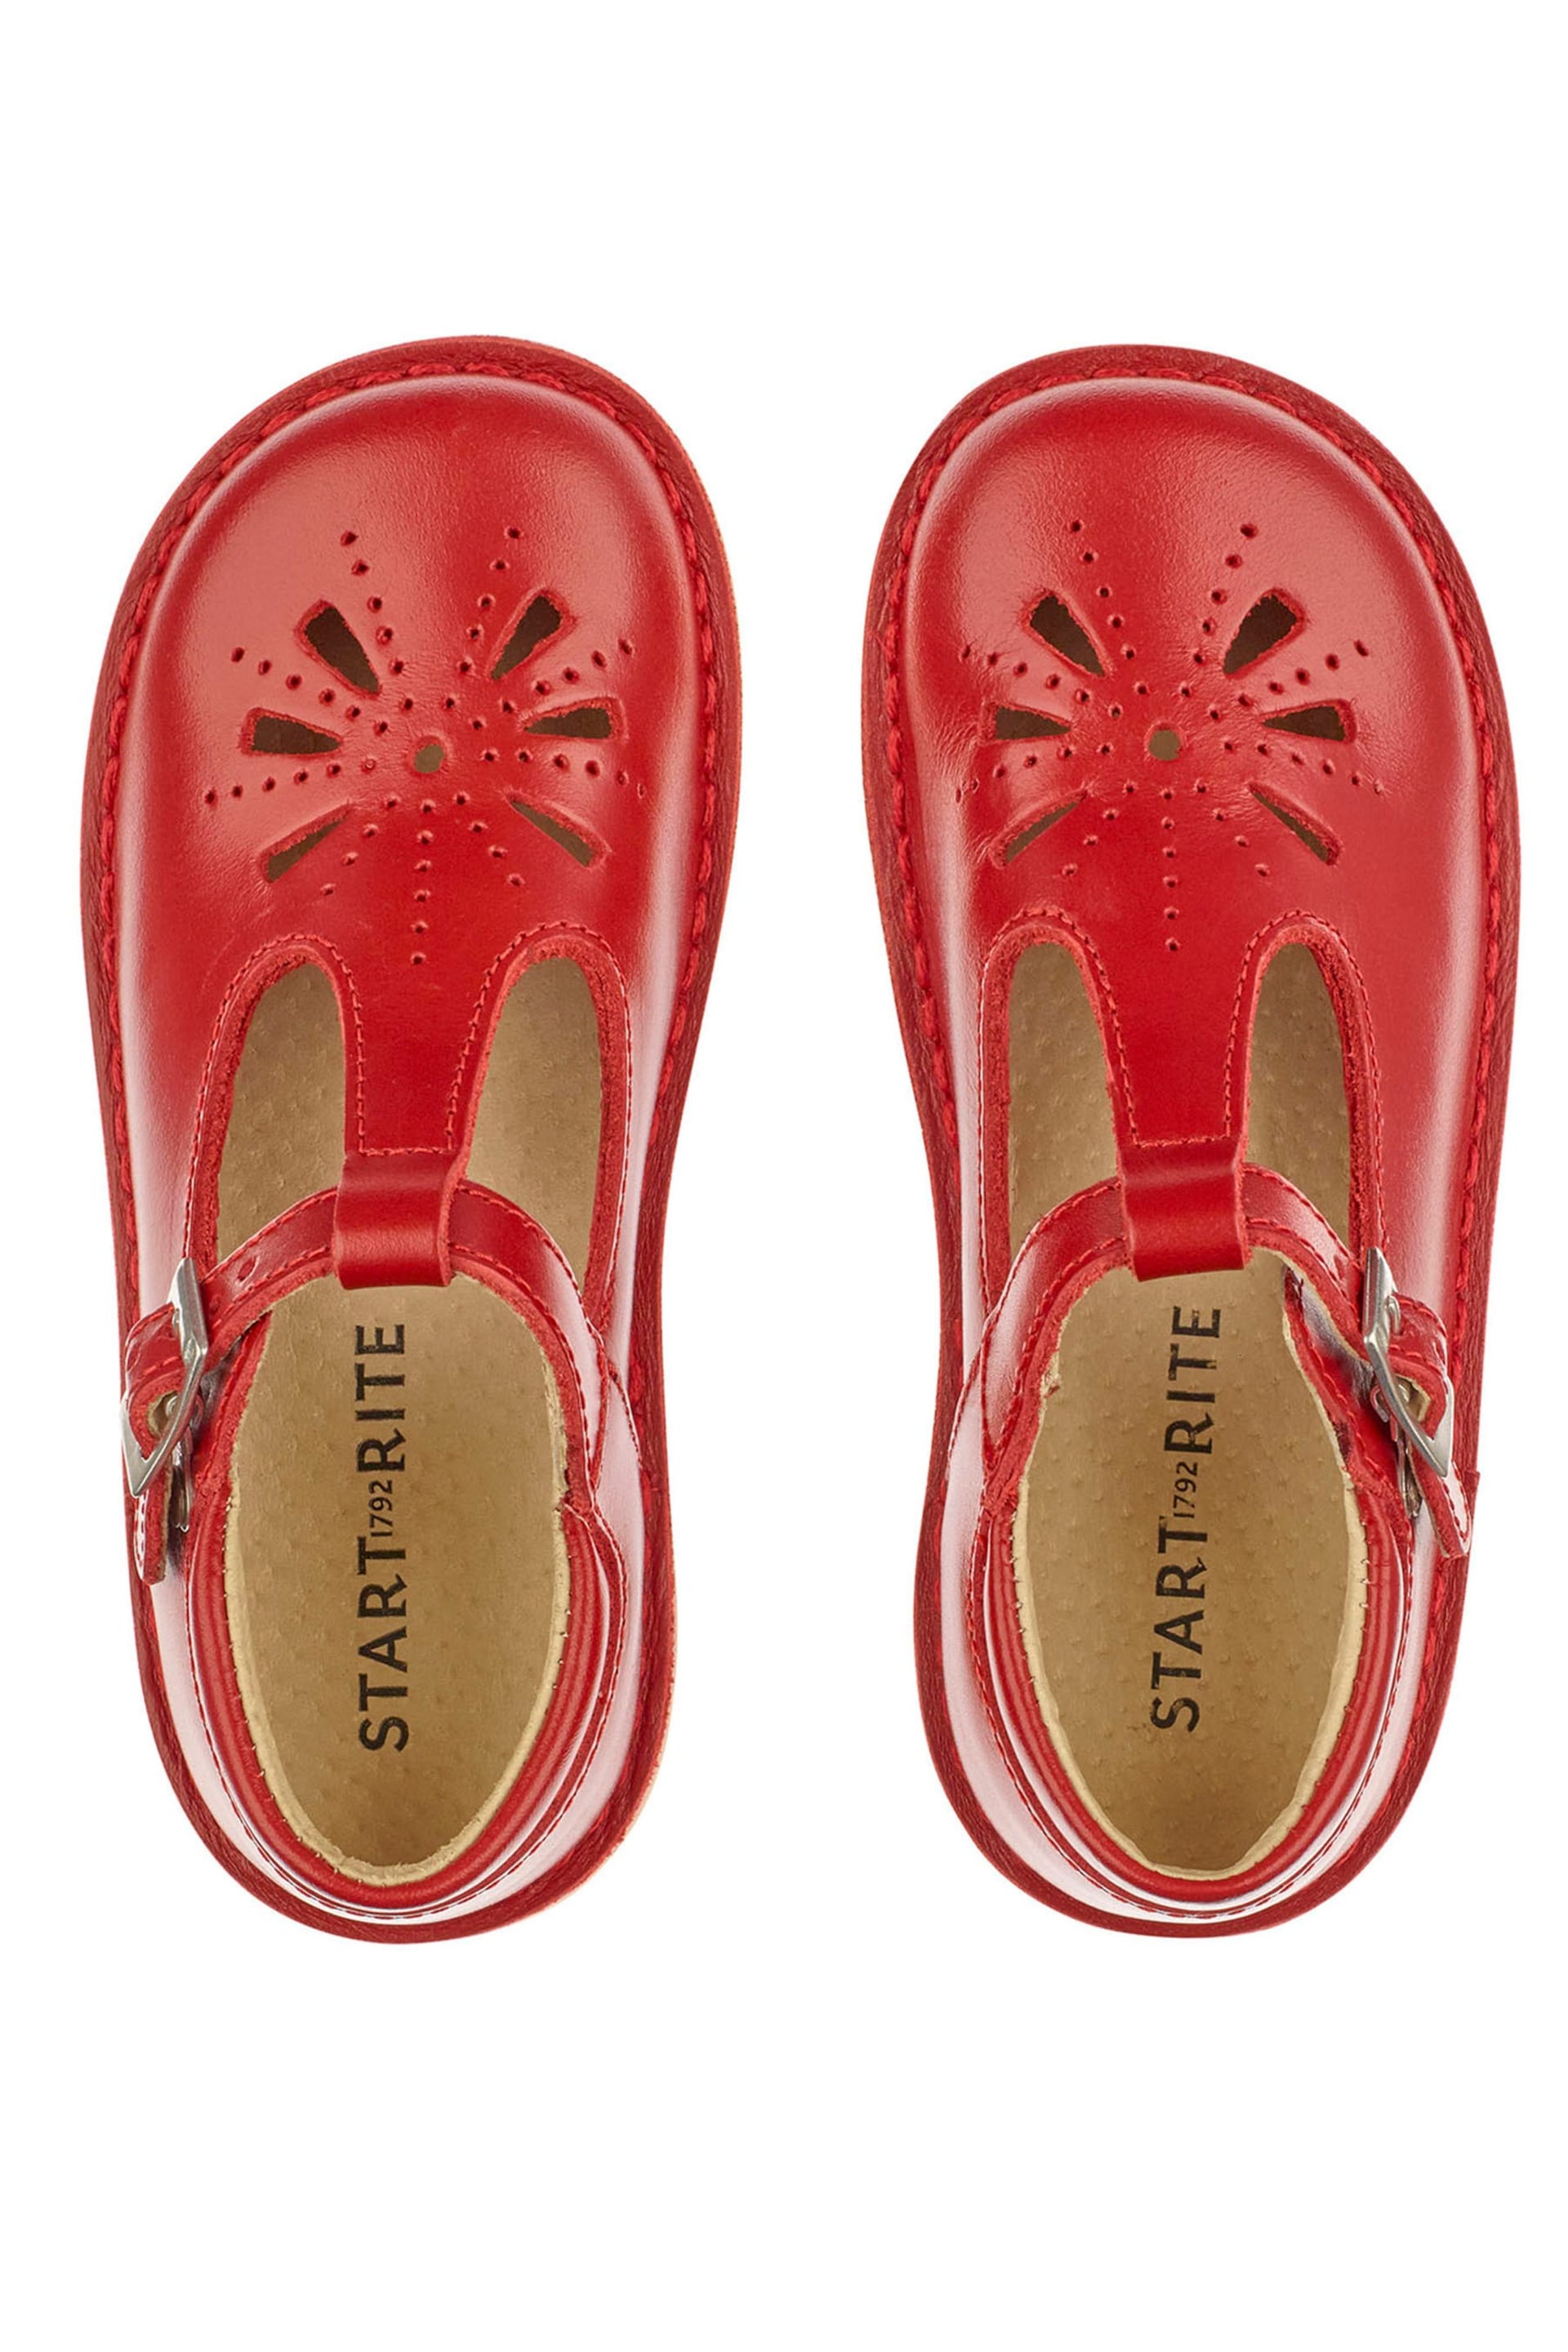 Start-Rite Lottie Red Leather Classic T-Bar Shoes F Fit - Image 5 of 6